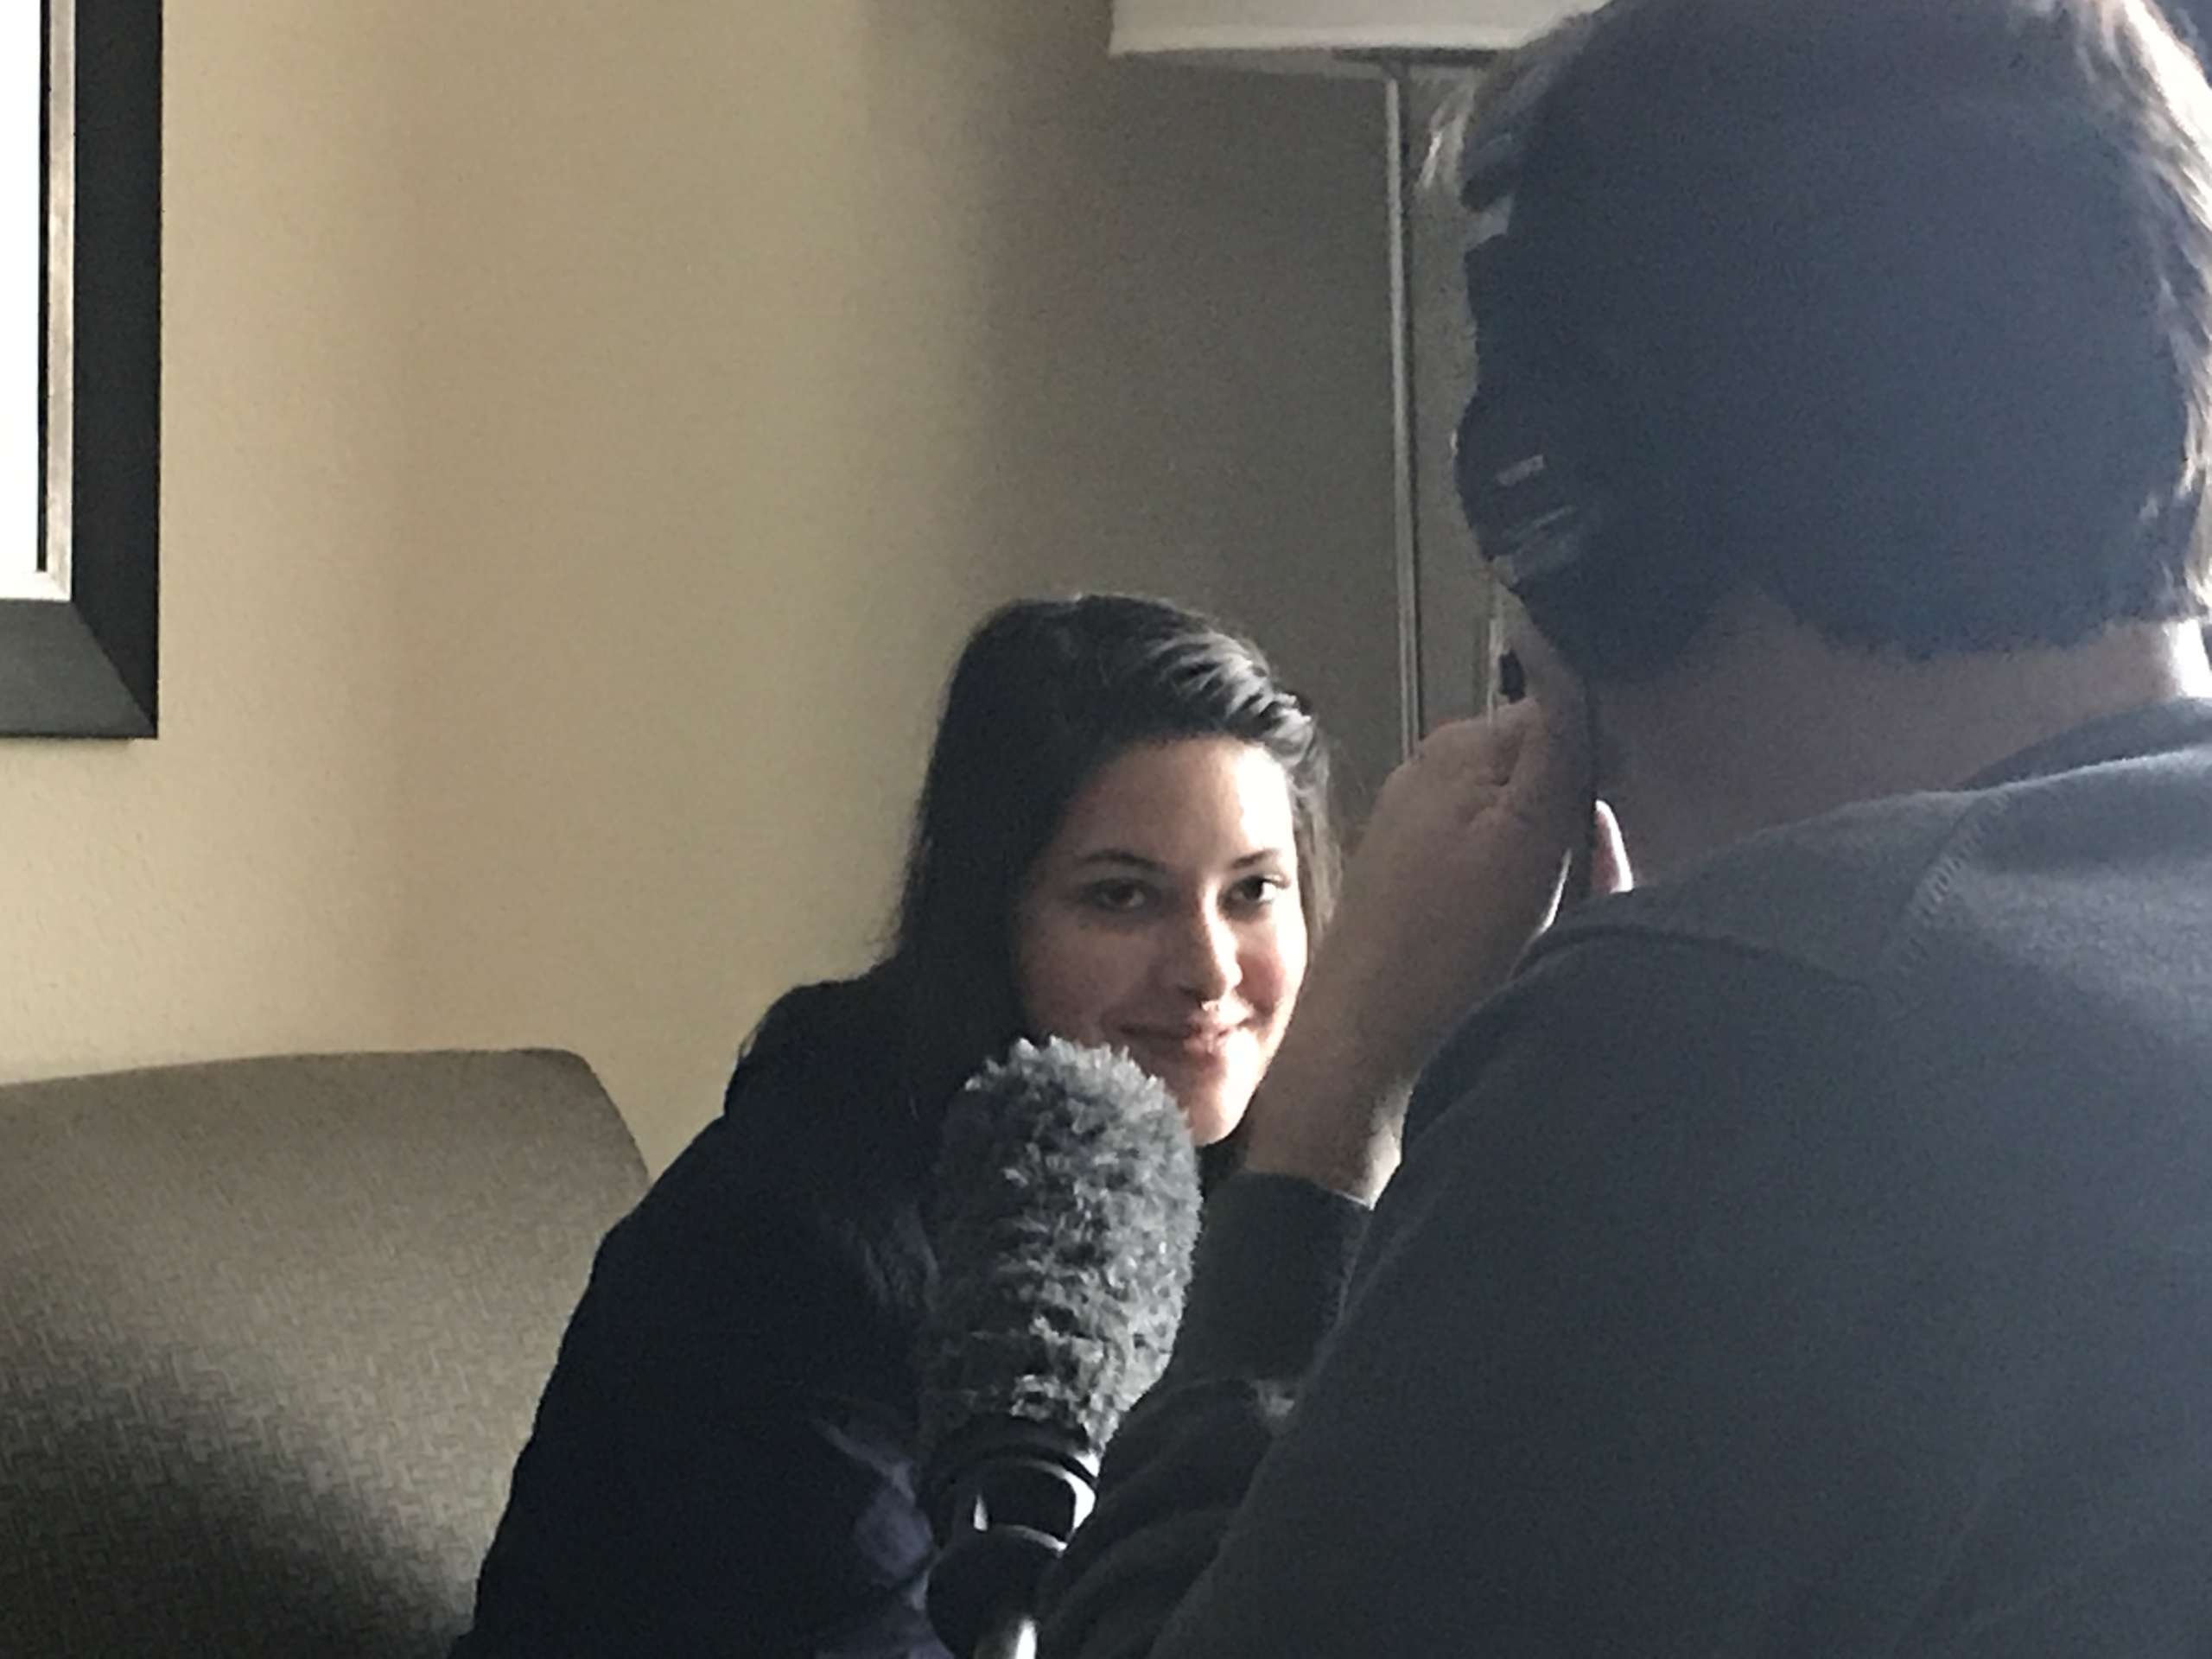 Karla Colon being interviewed by NPR’s Jeff Brady in Bismarck, North Dakota, in October, 2018, about her participation in the NoDAPL uprising at Standing Rock.